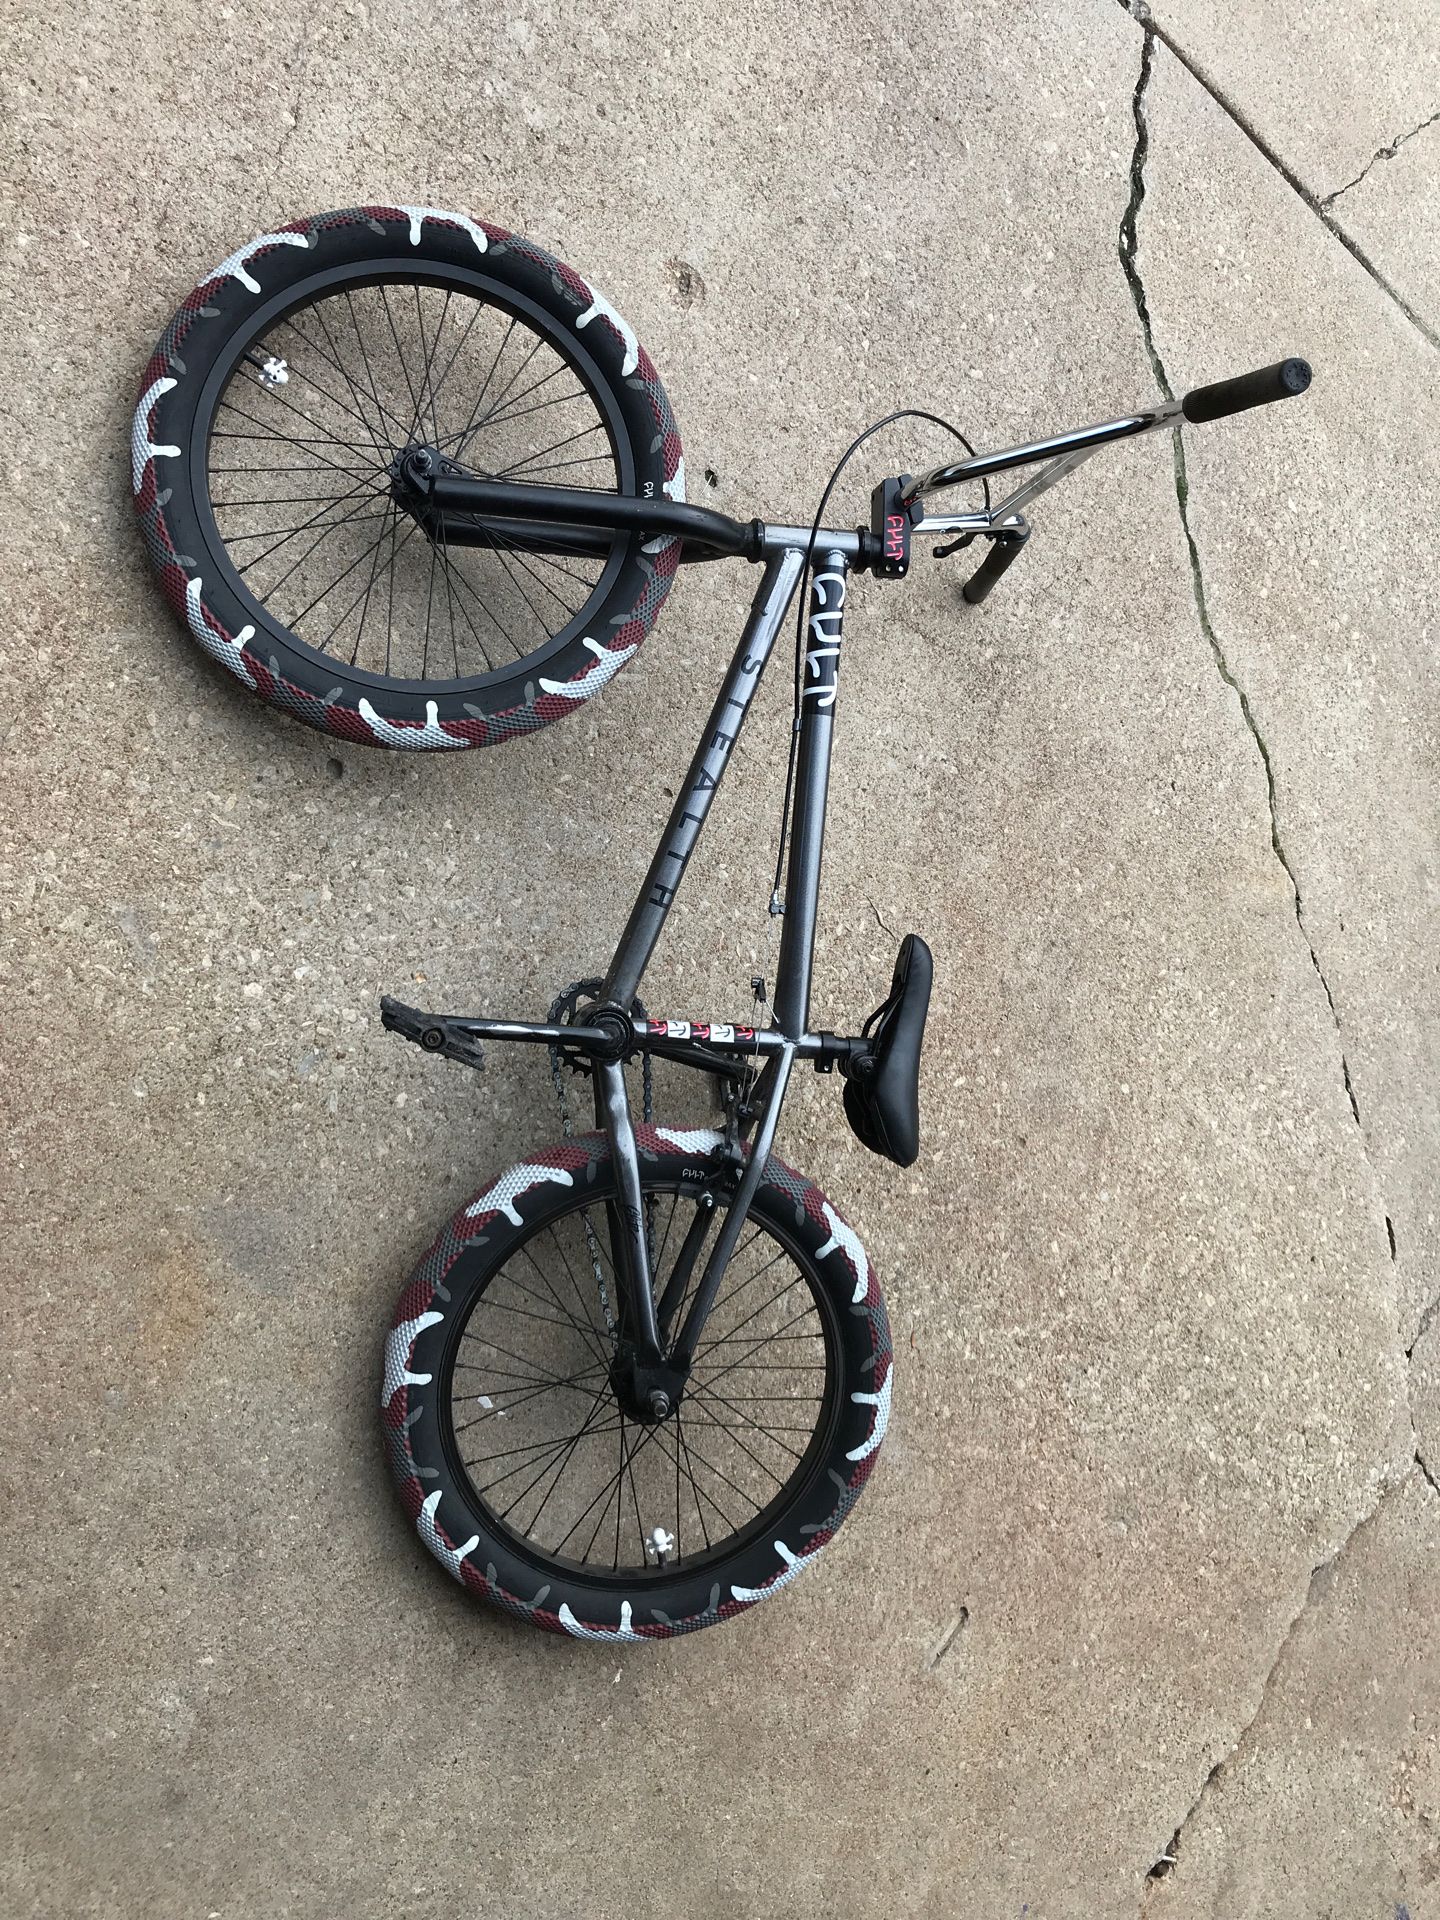 Elite bmx bike with all new cult parts